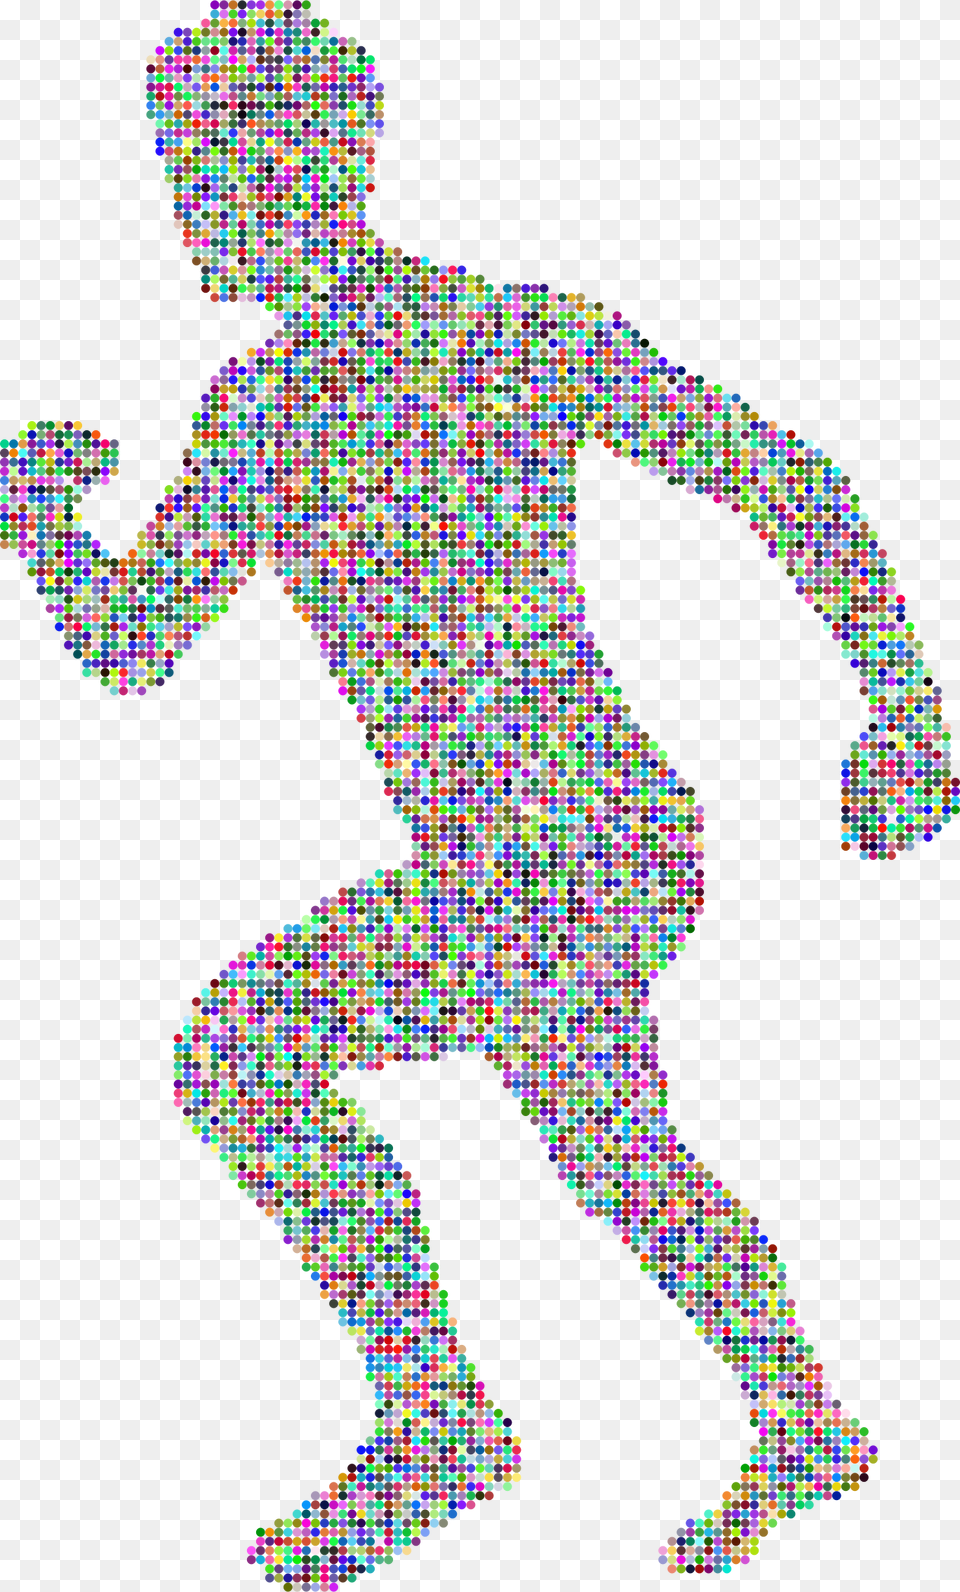 Running Man Portable Network Graphics, Art, Mosaic, Tile, Person Png Image